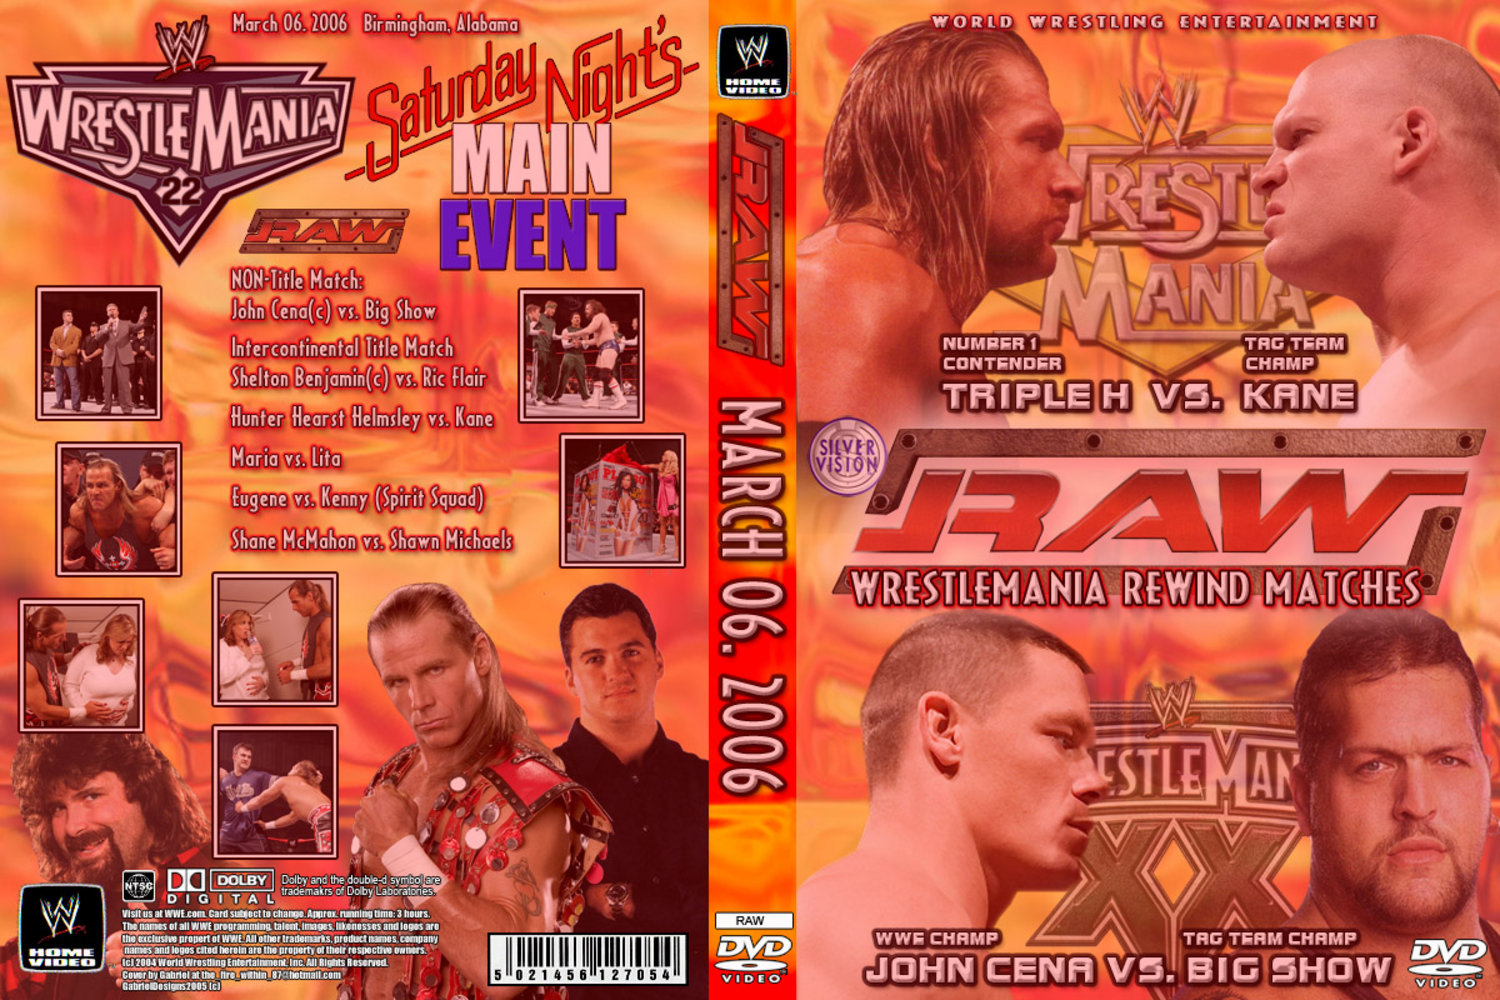 Jaquette DVD WWE Raw March 6th 2006